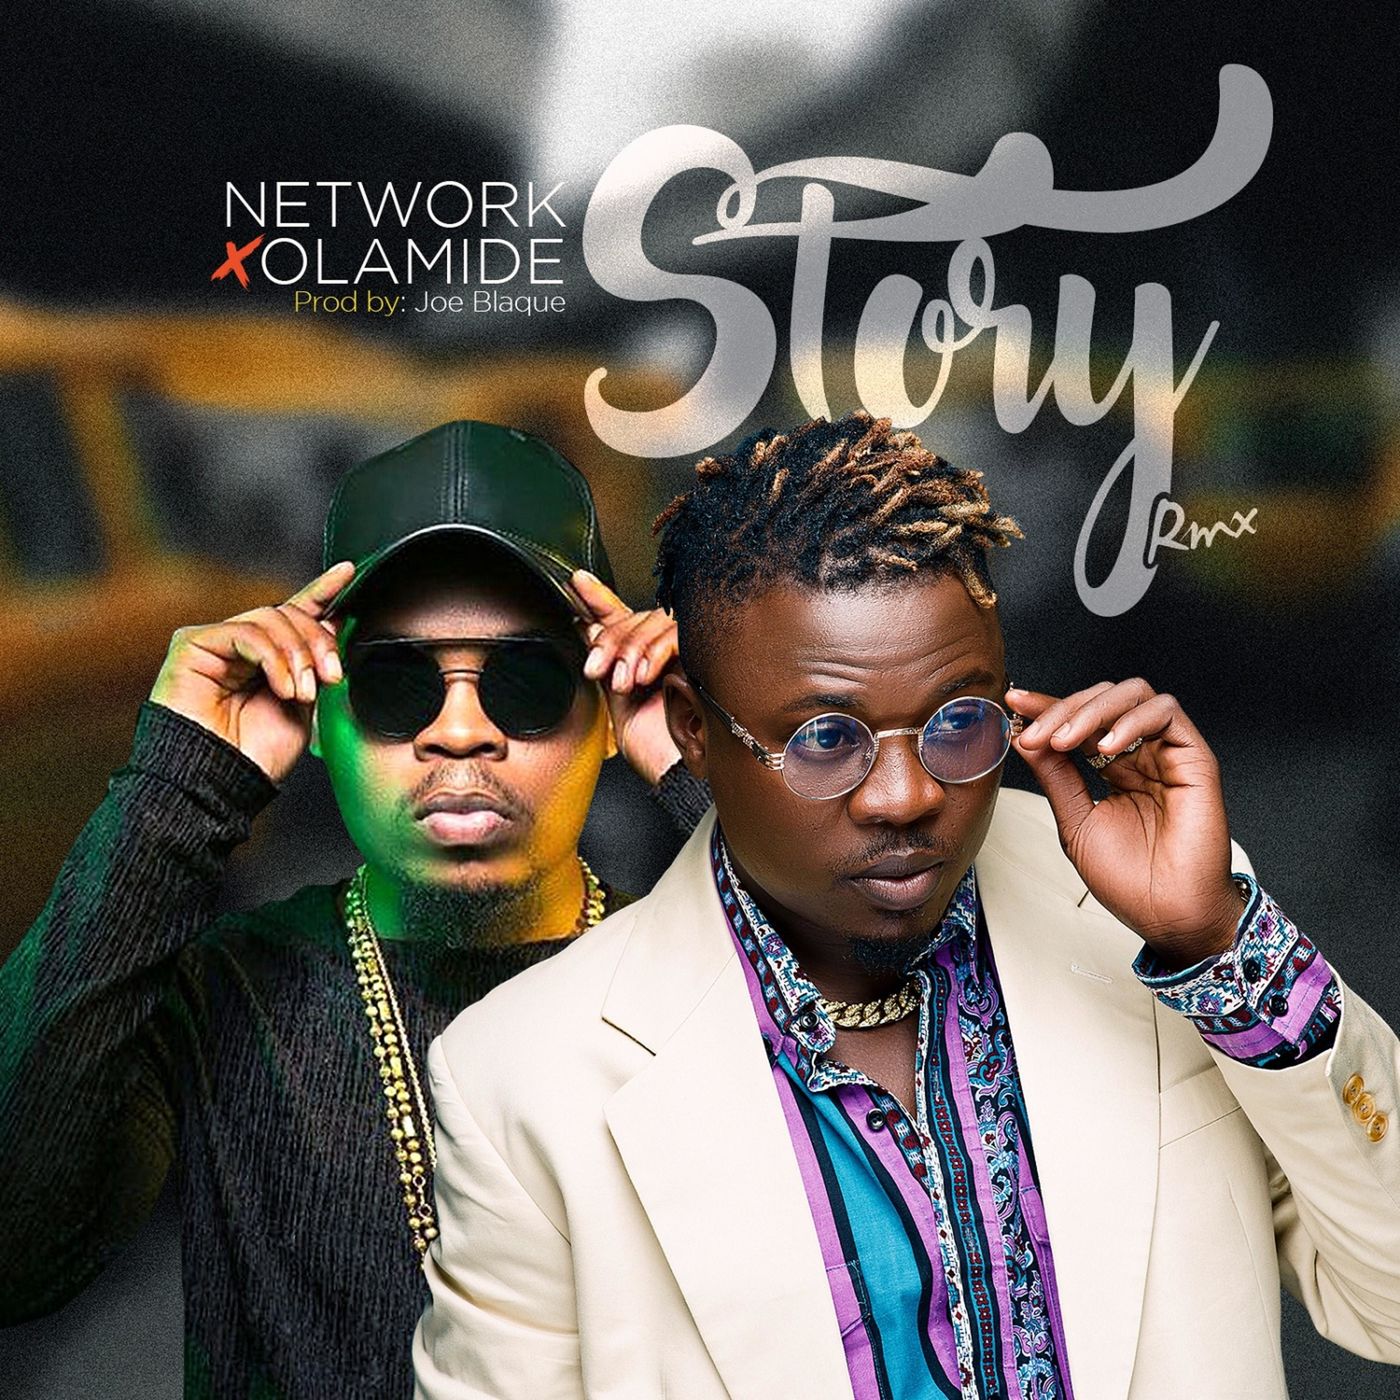 Network ft. Olamide - Story (Remix)